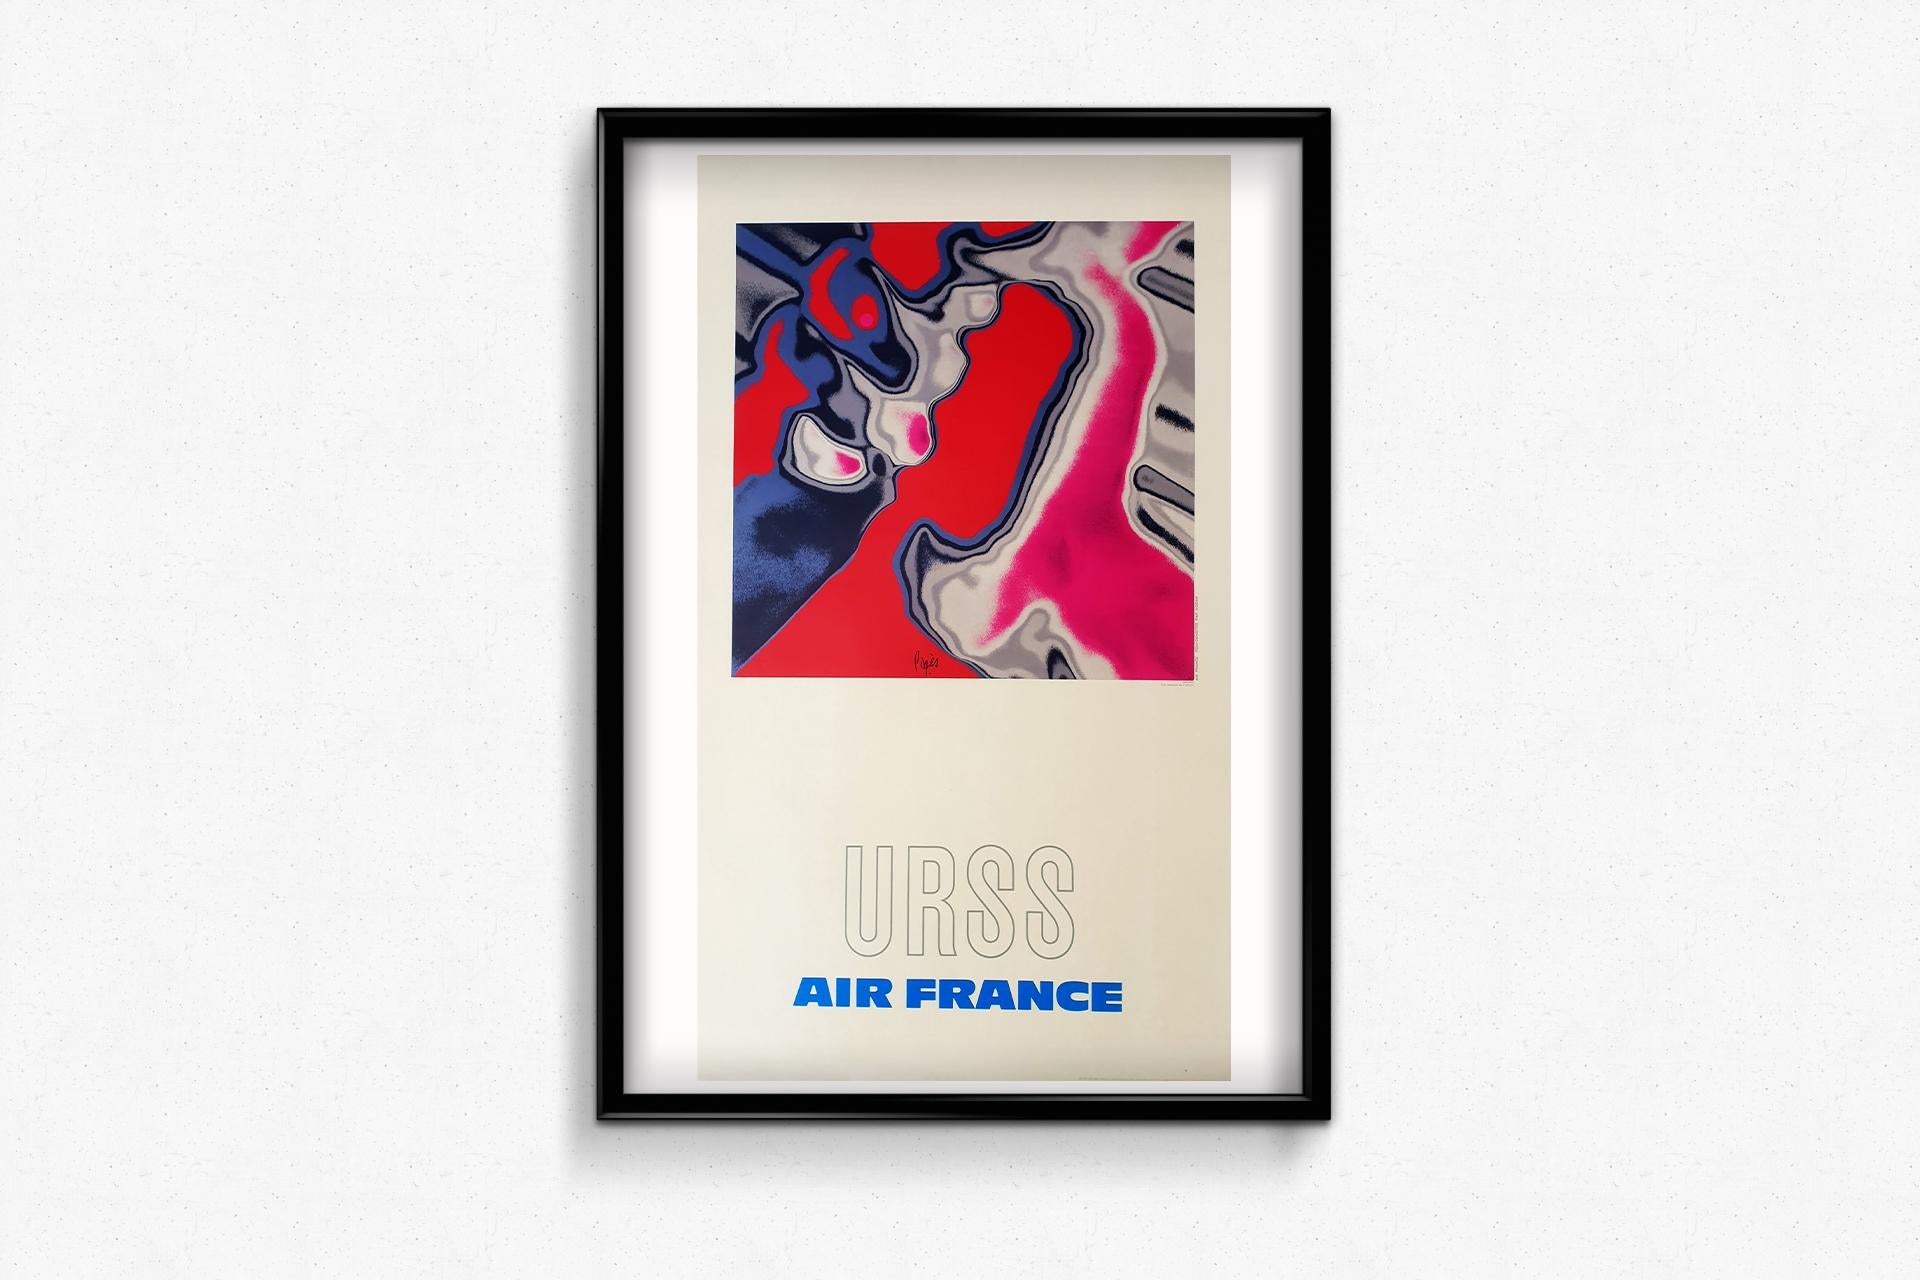 Circa 1970 Original vintage poster to promote Air France flight to USSR - URSS For Sale 1